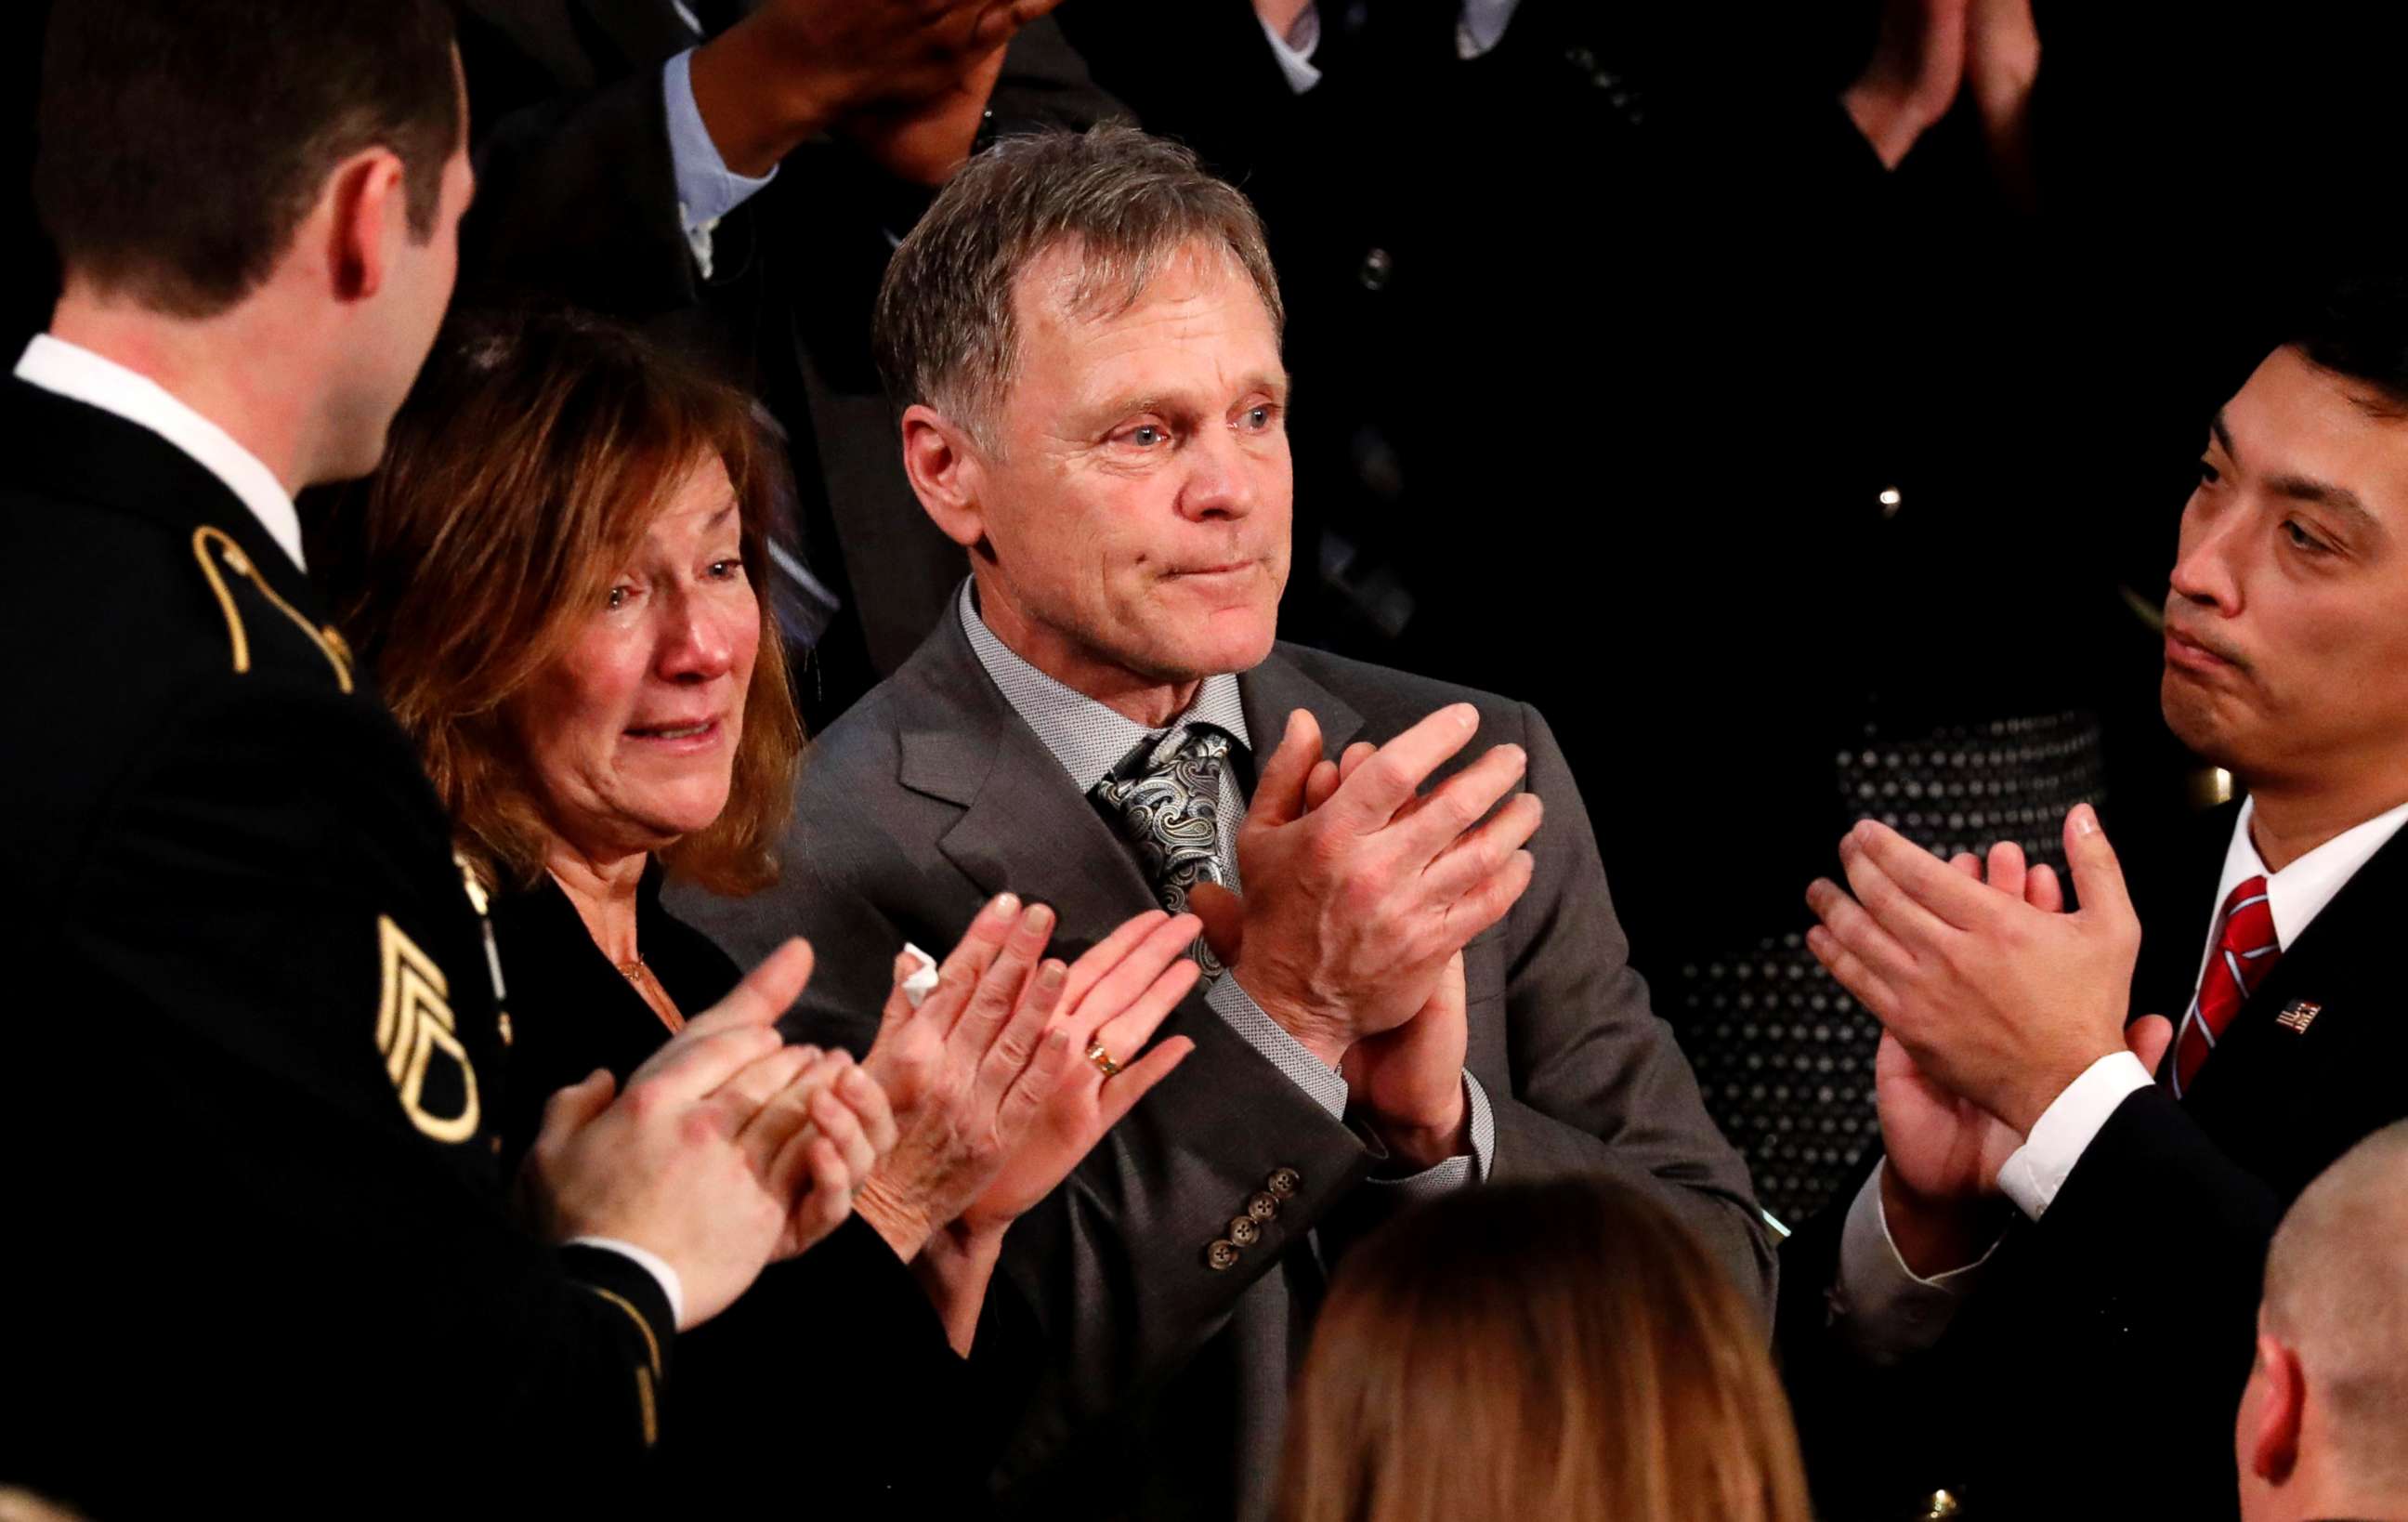 PHOTO: Otto Warmbier's parents Fred and Cindy Warmbier applaud as President Donald Trump talks about the death of their son Otto after his arrest in North Korea during the State of the Union address in Washington, D.C., Jan. 30, 2018.